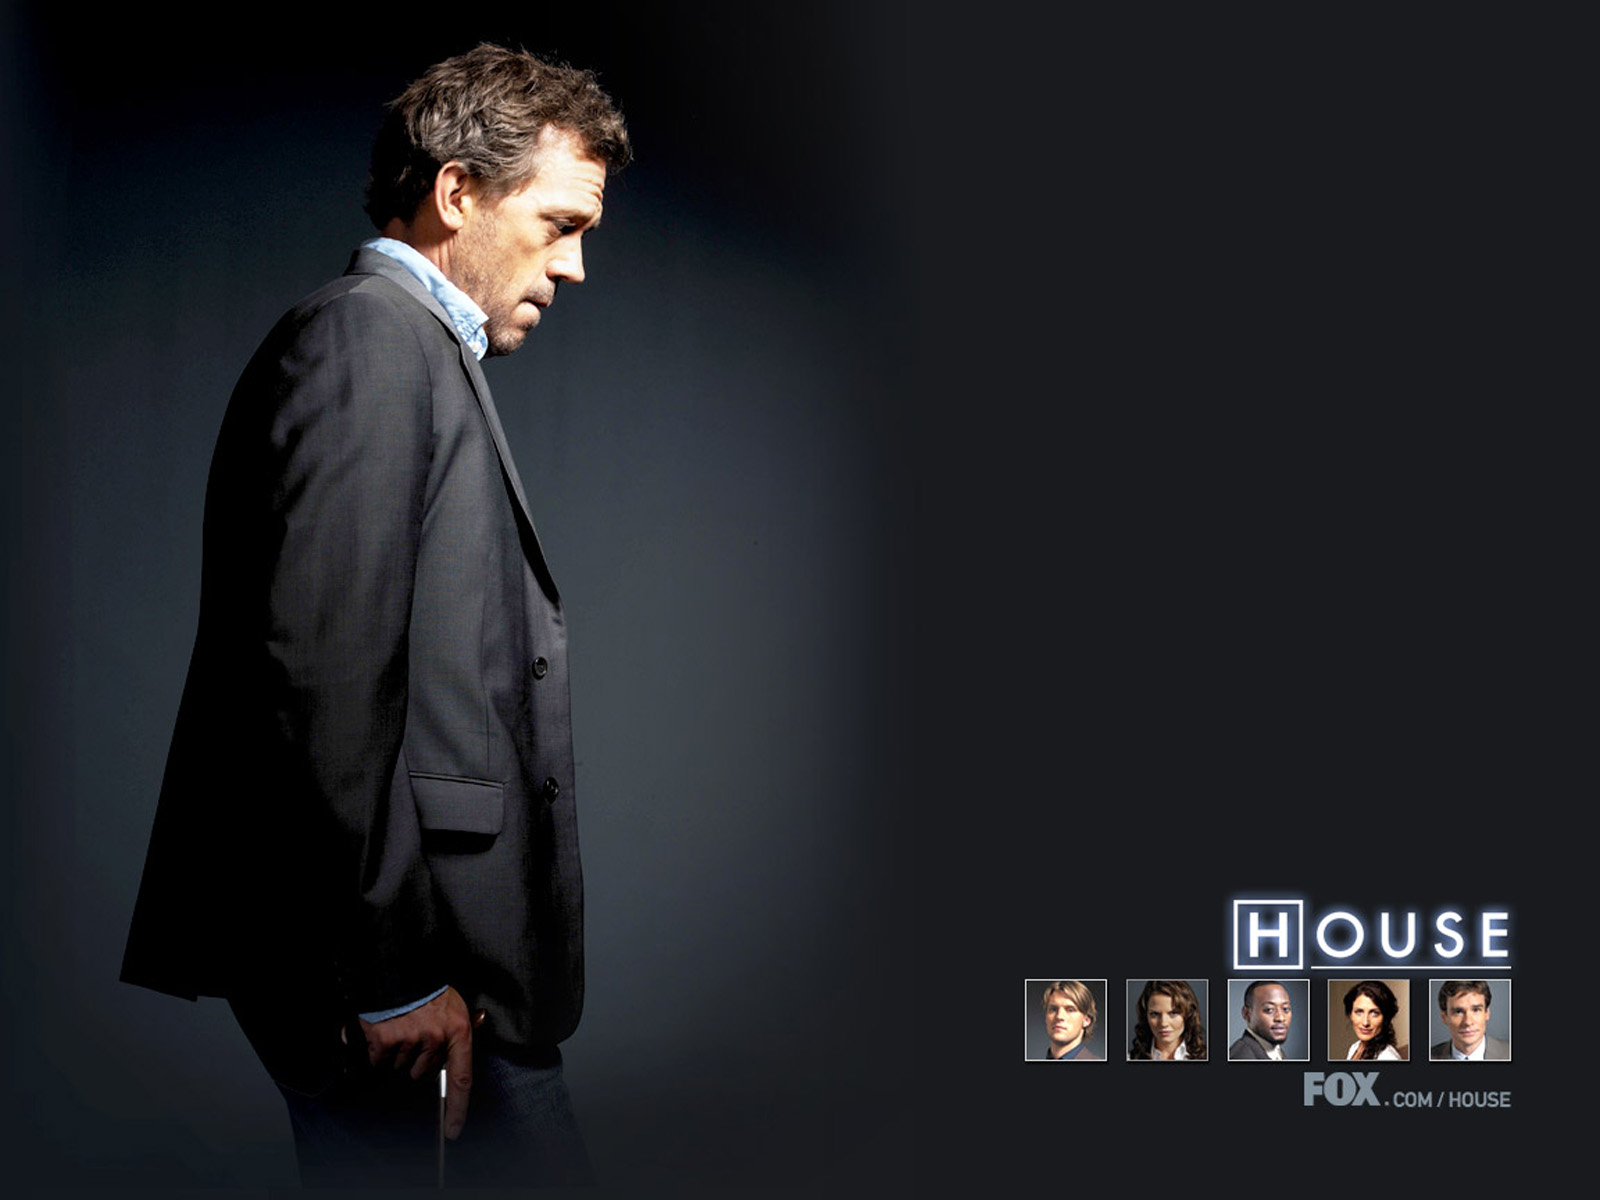 Hugh Laurie portraying Gregory House, the main character from the tv show House.